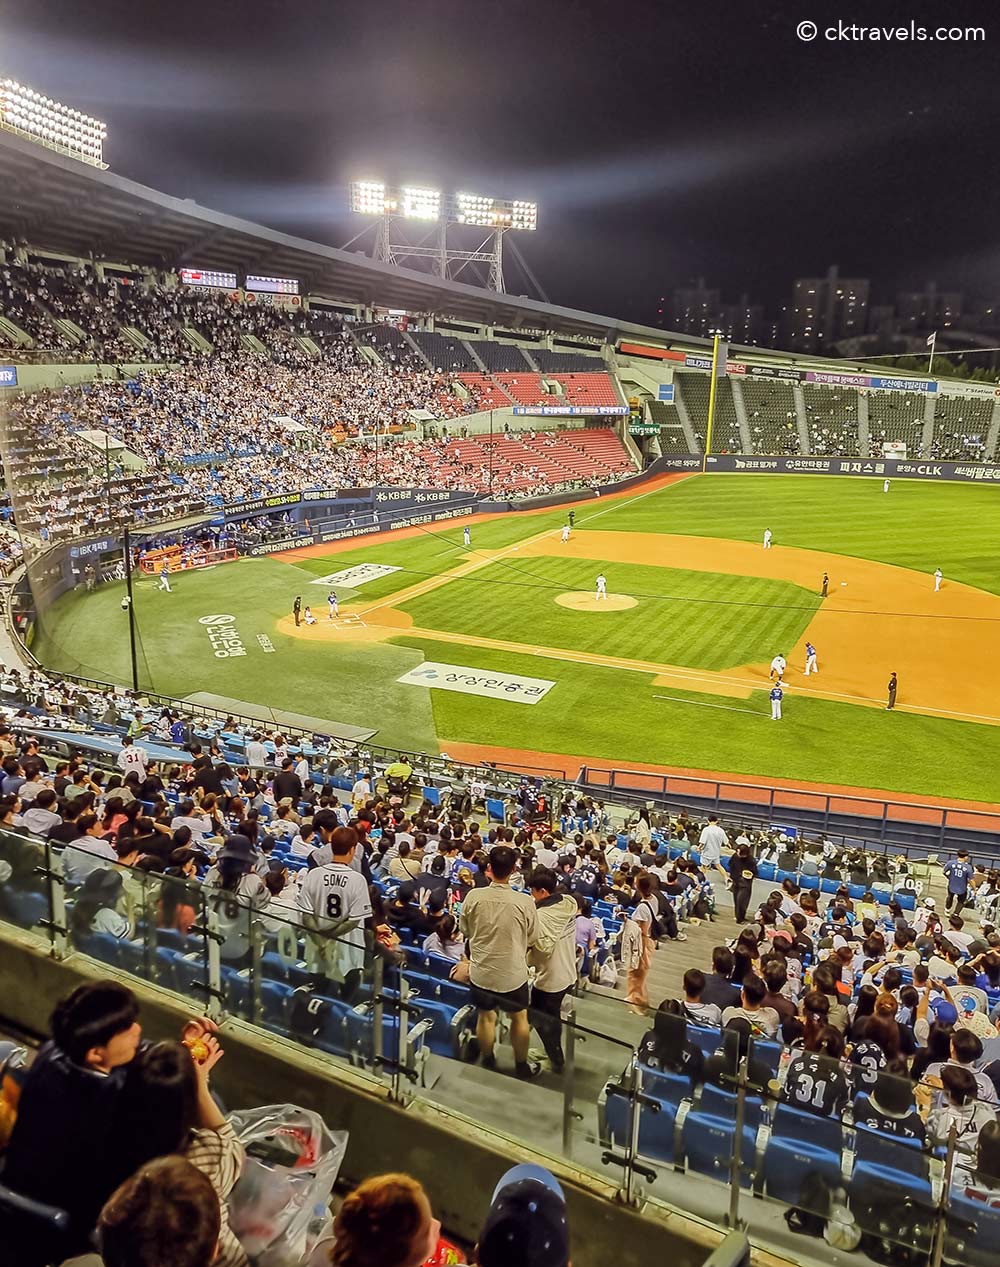 Catch a Seoul baseball game - Things to do in Seoul